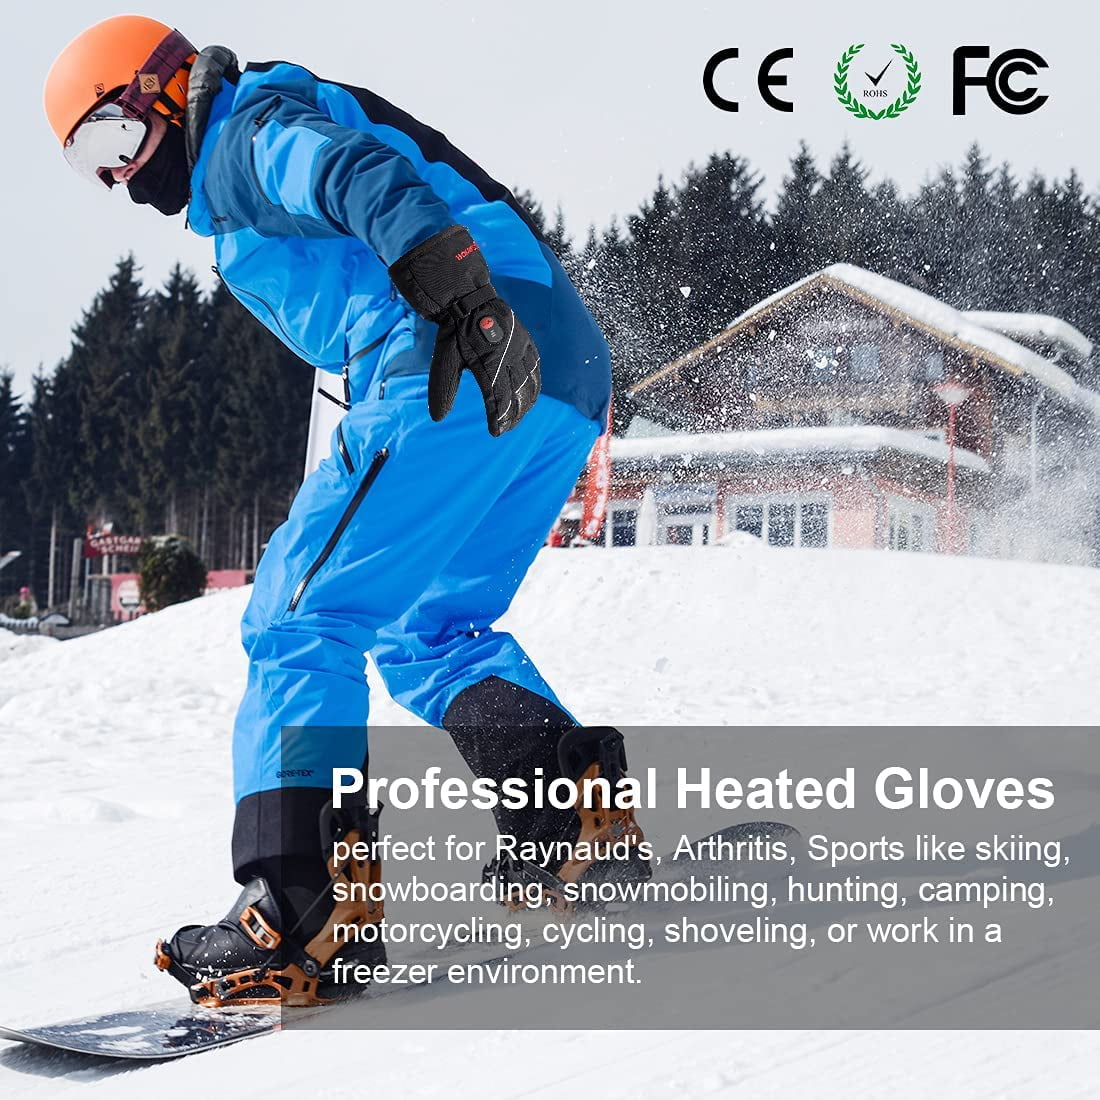 Electric Heated Gloves Thermal Heat Winter Warm Skiing Snowboarding Hunting Fishing  Waterproof Rechargeable 231221 From Jin05, $32.71